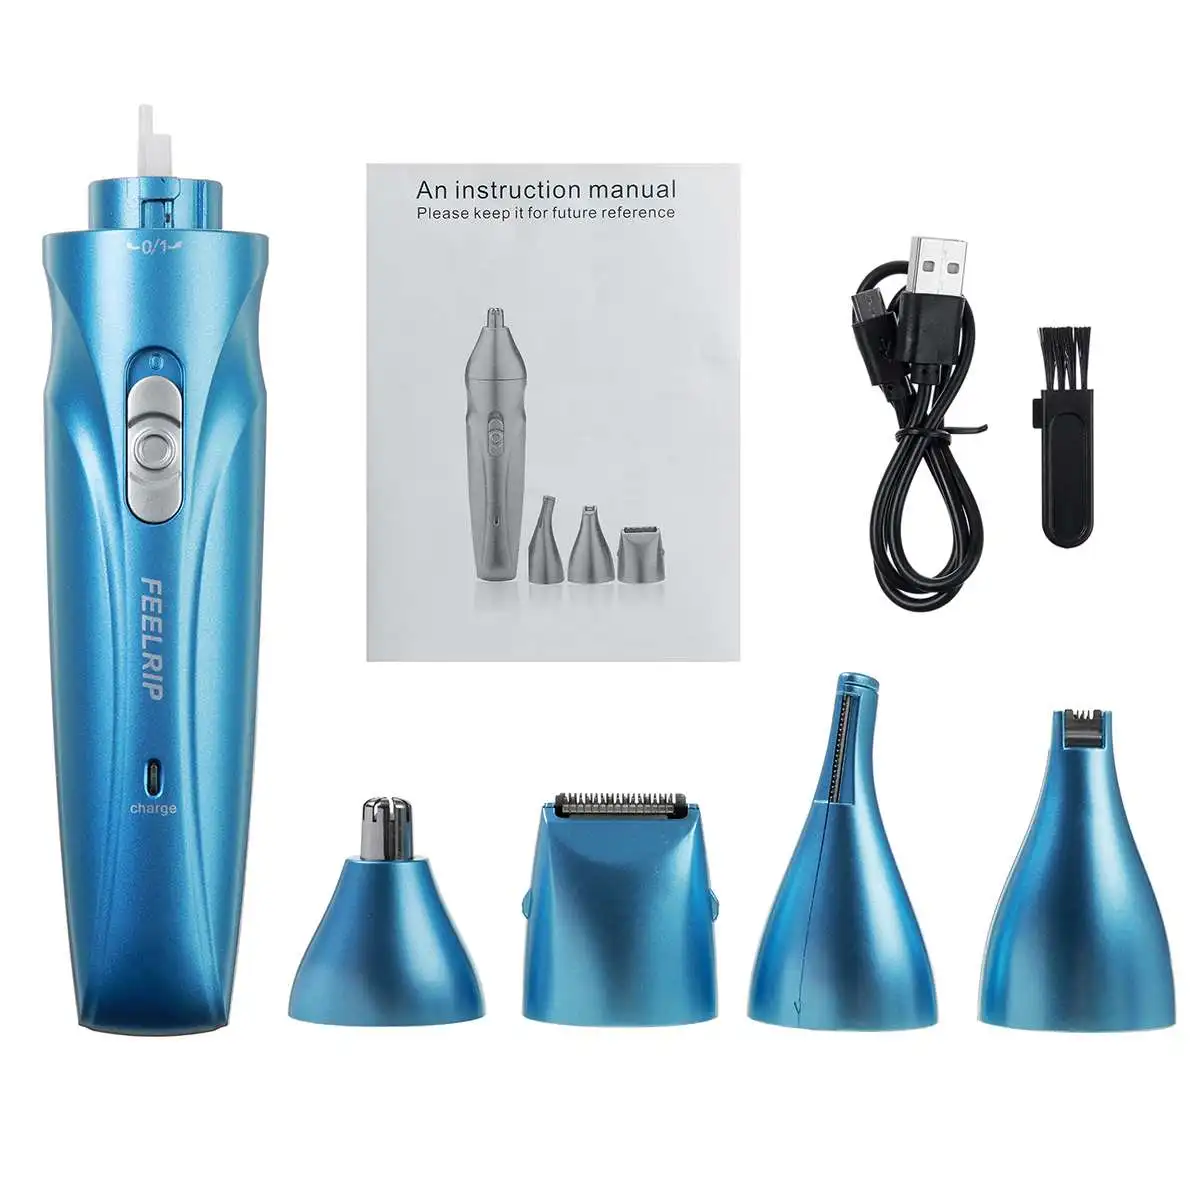 

4-IN-1 Rechargeable Hair Trimmer Electric Hair Clipper Nose Hair Cutting Machine with Rotatable Head Man Woman Razor Remover Kit